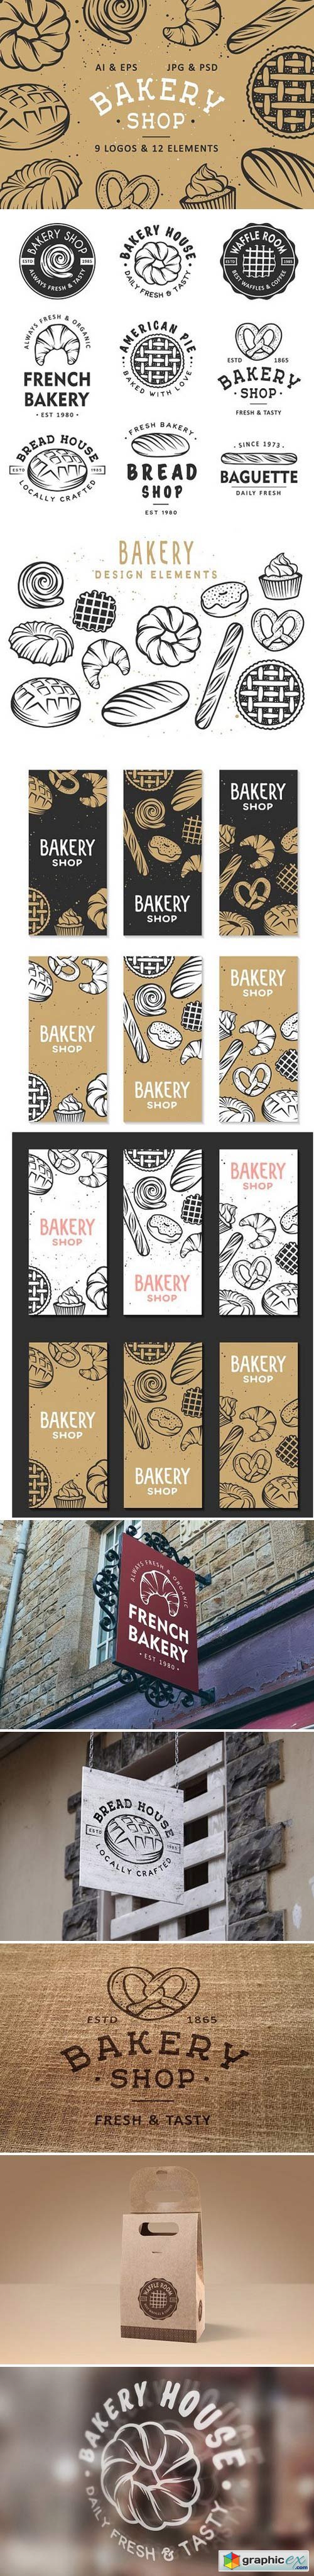 Set of bakery logos and elements